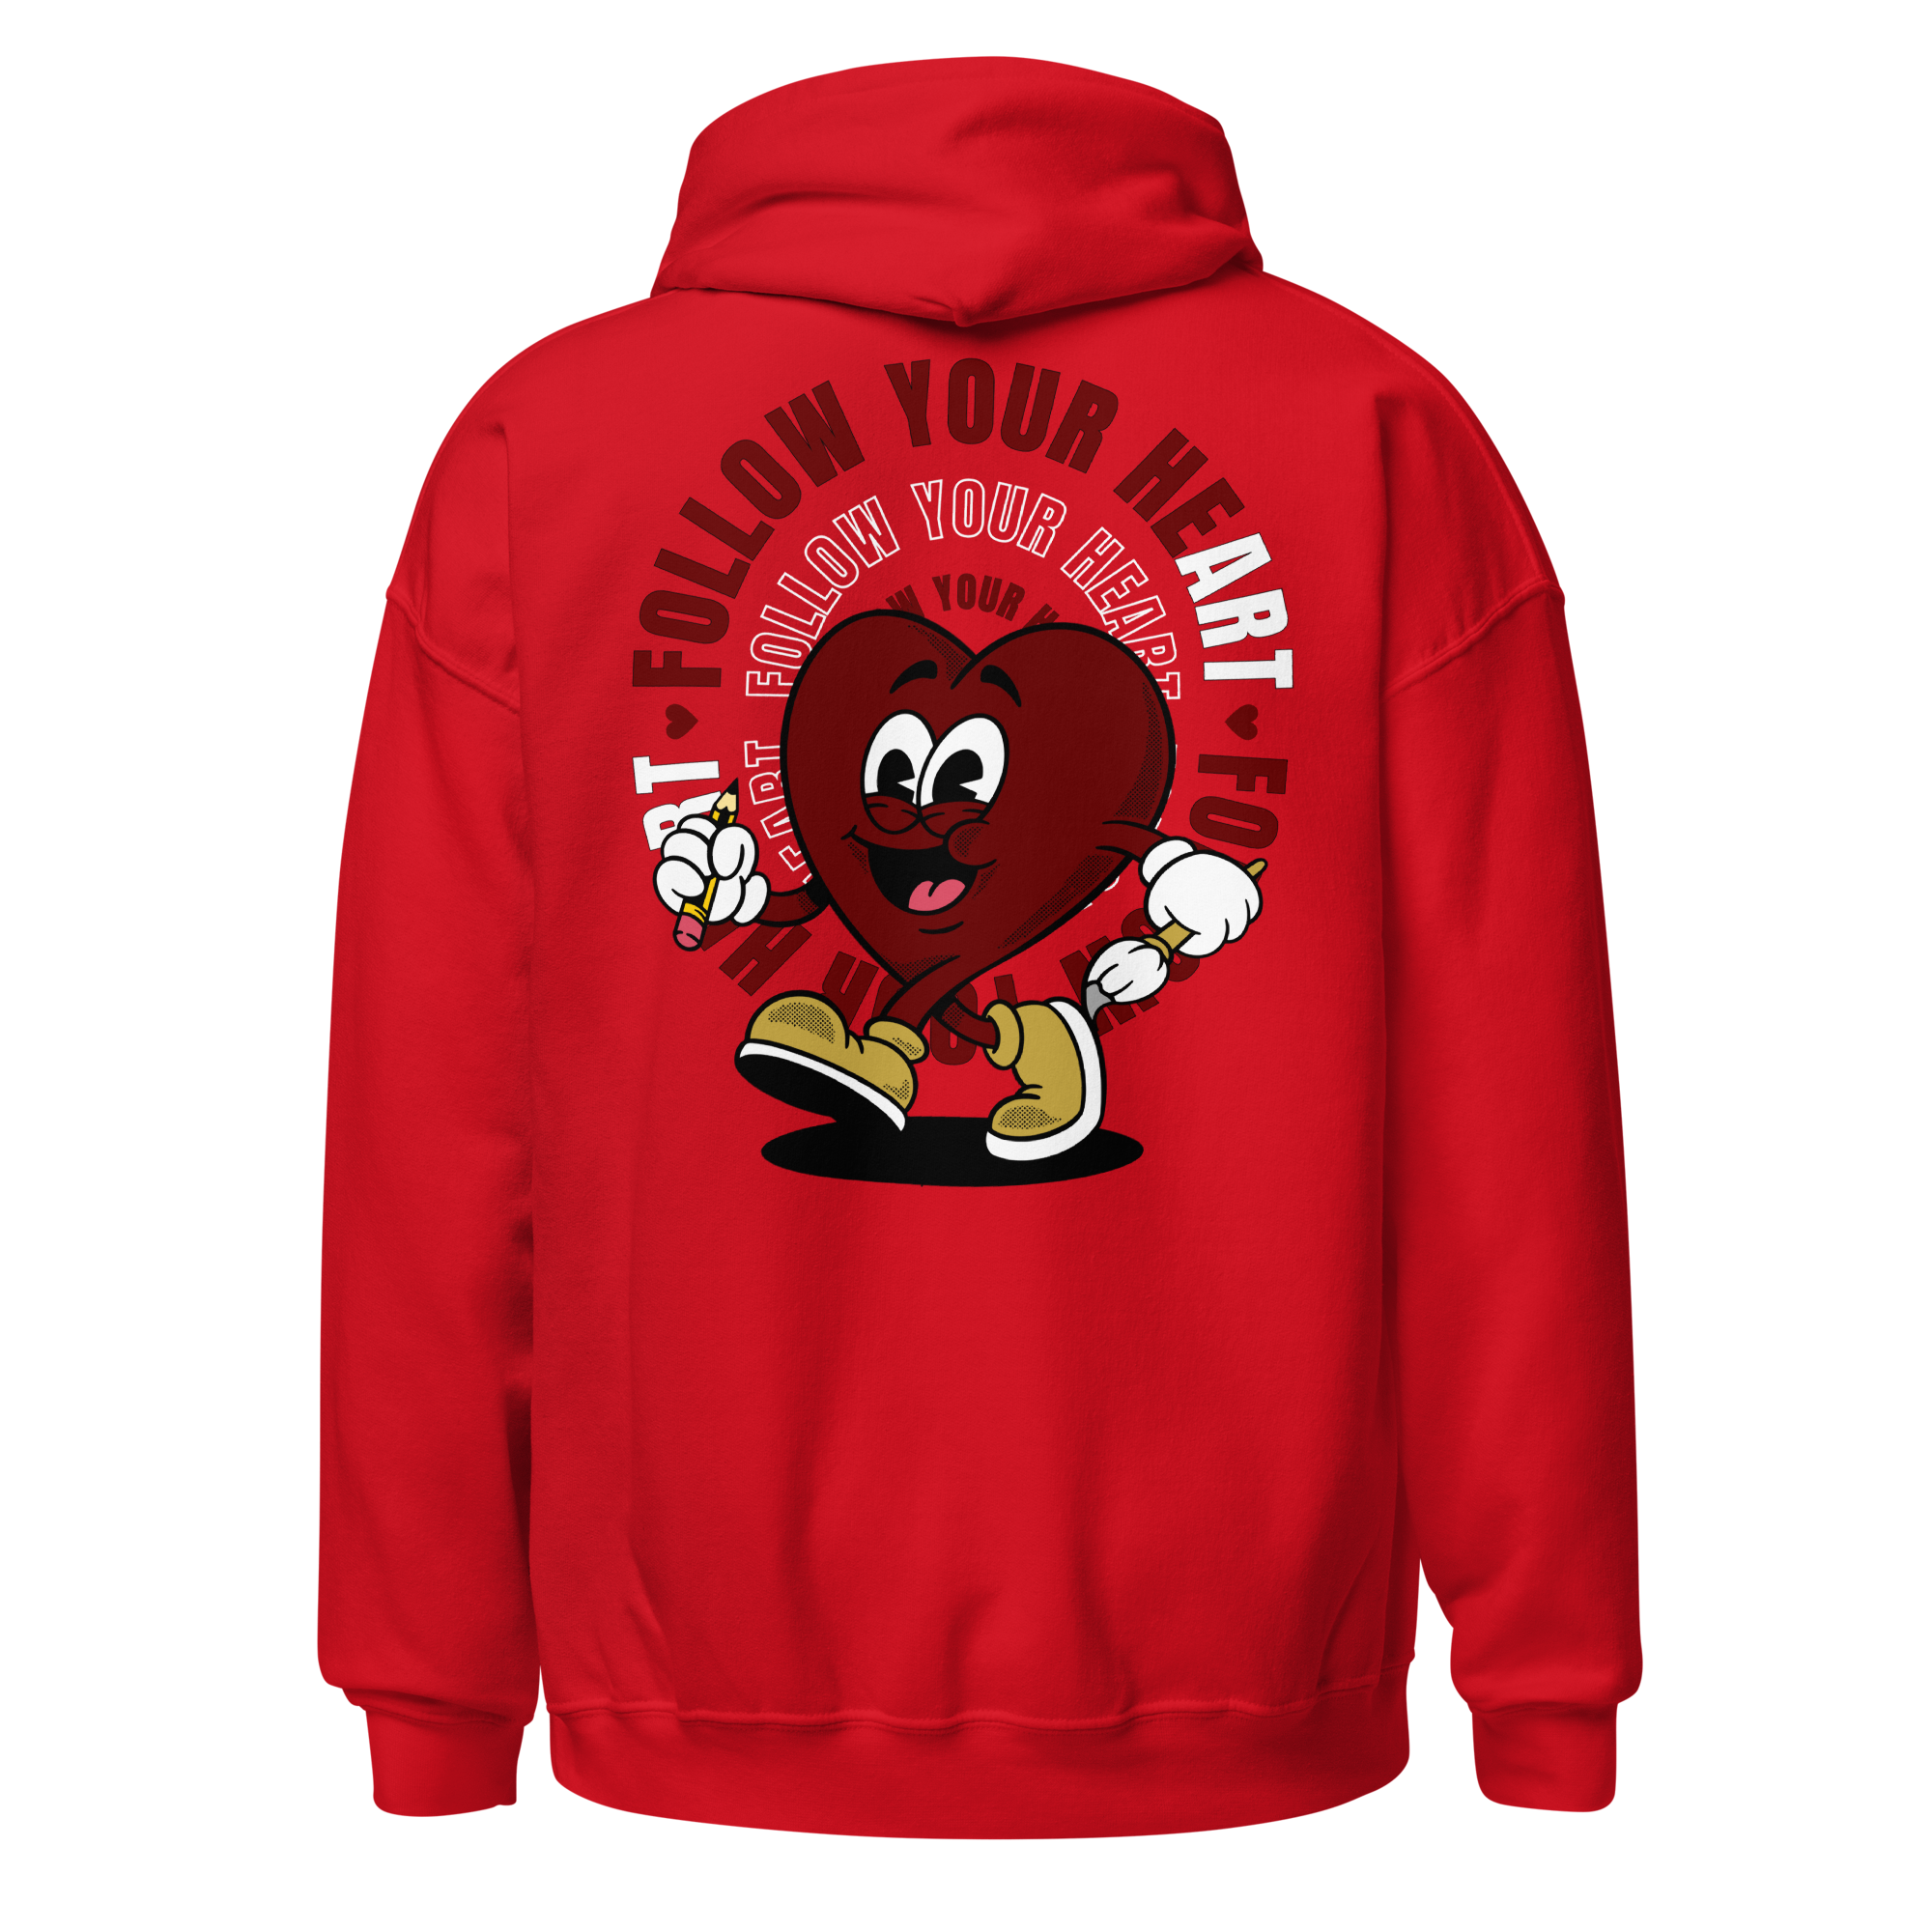 Follow Your Heart Embroidery Hoodie - Red on Red (Unisex)